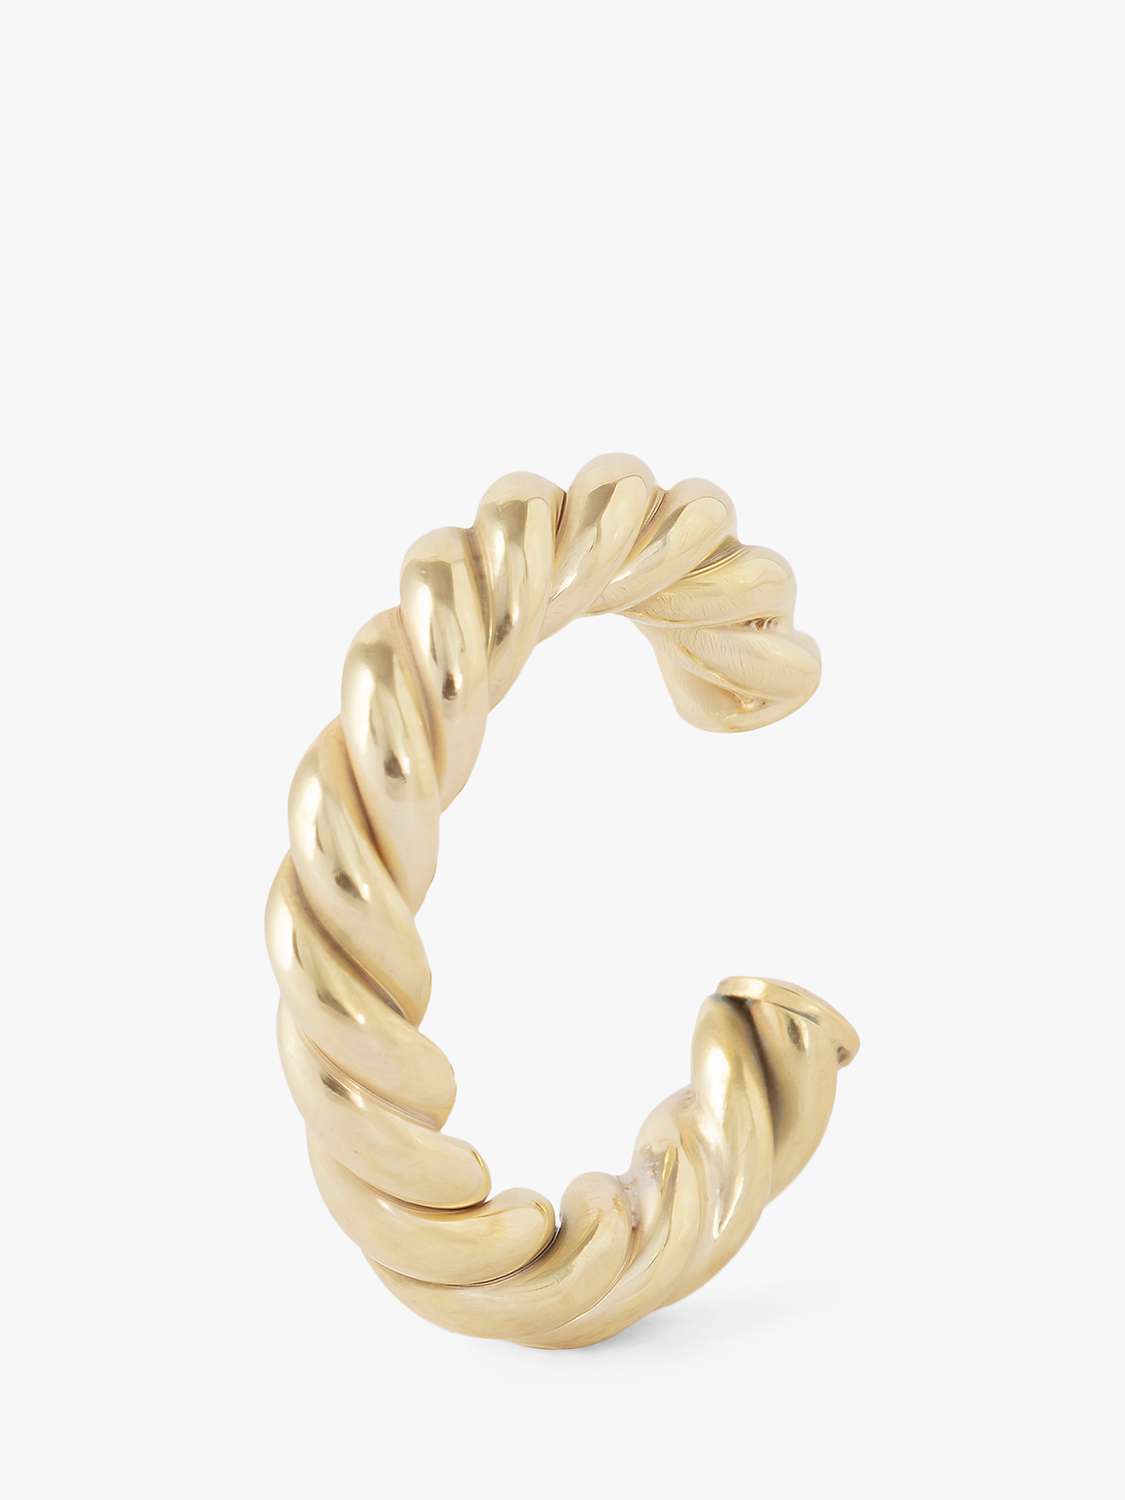 Buy LARNAUTI Twisted Rope Single Ear Cuff, Gold Online at johnlewis.com